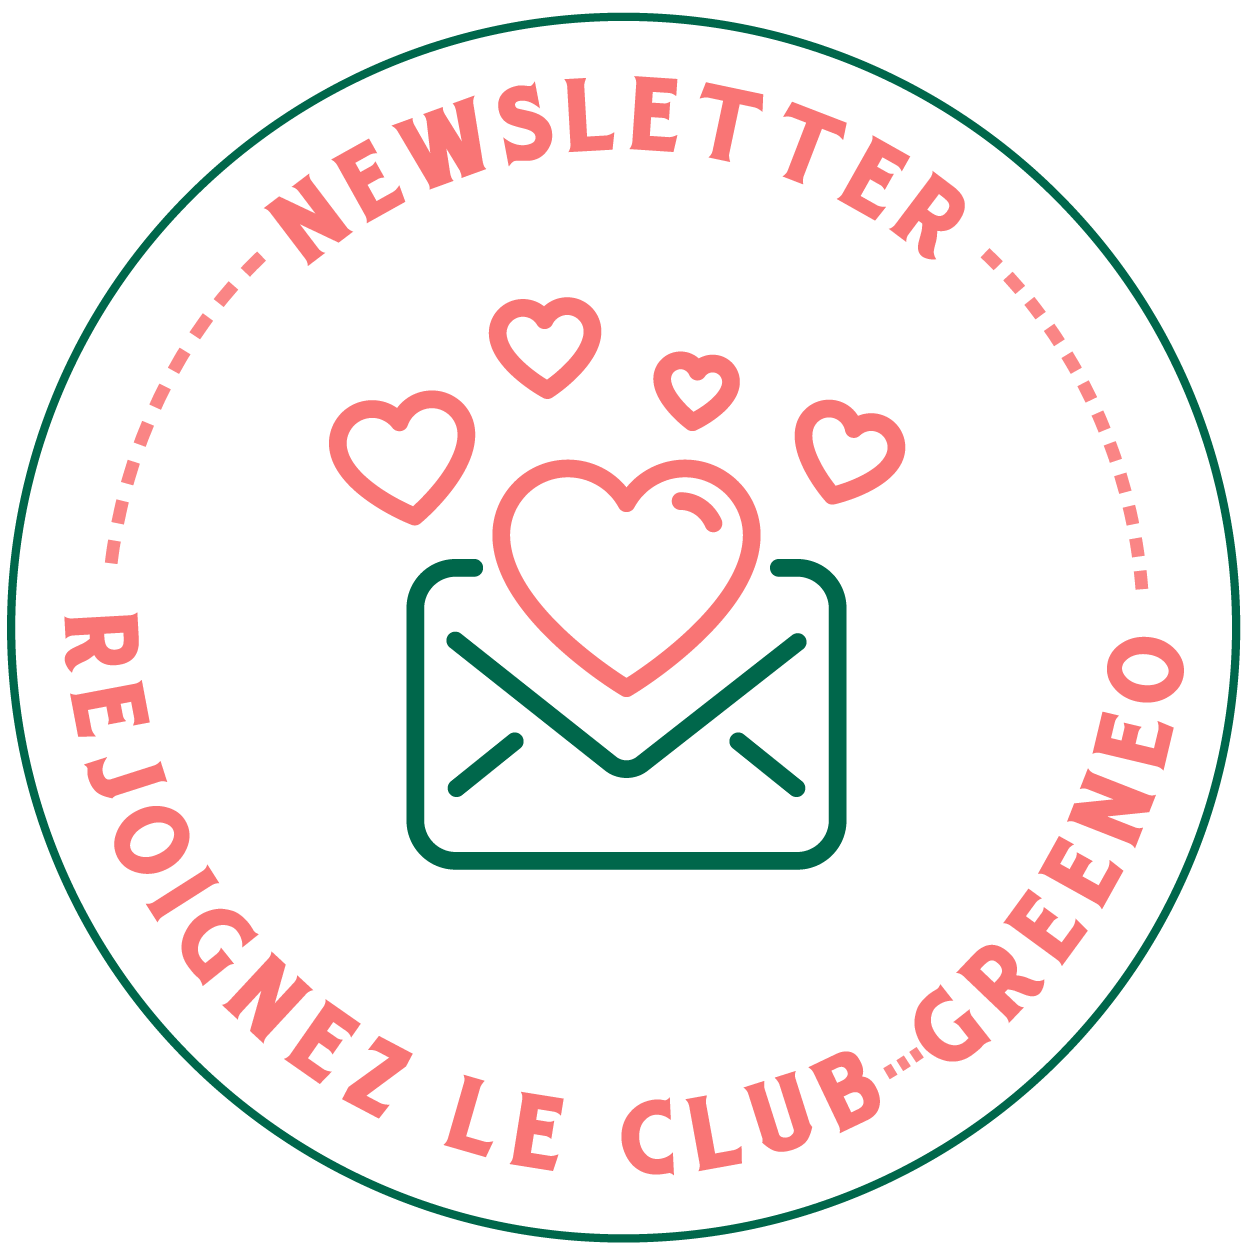 Newsletter - Join the club